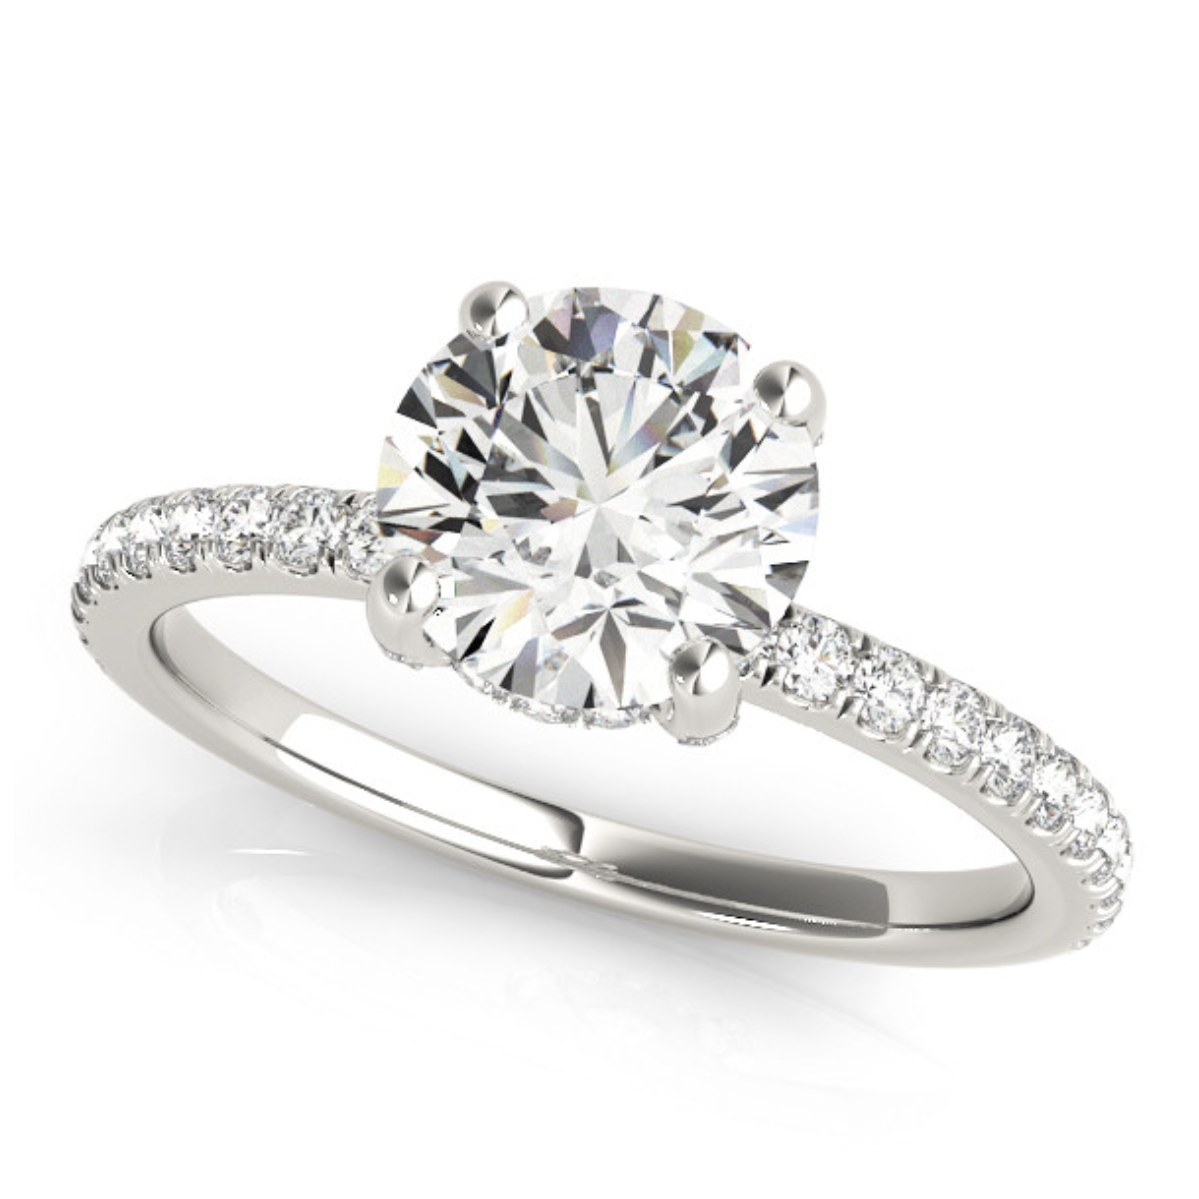 Round Diamond Engagement Ring with Hidden Halo